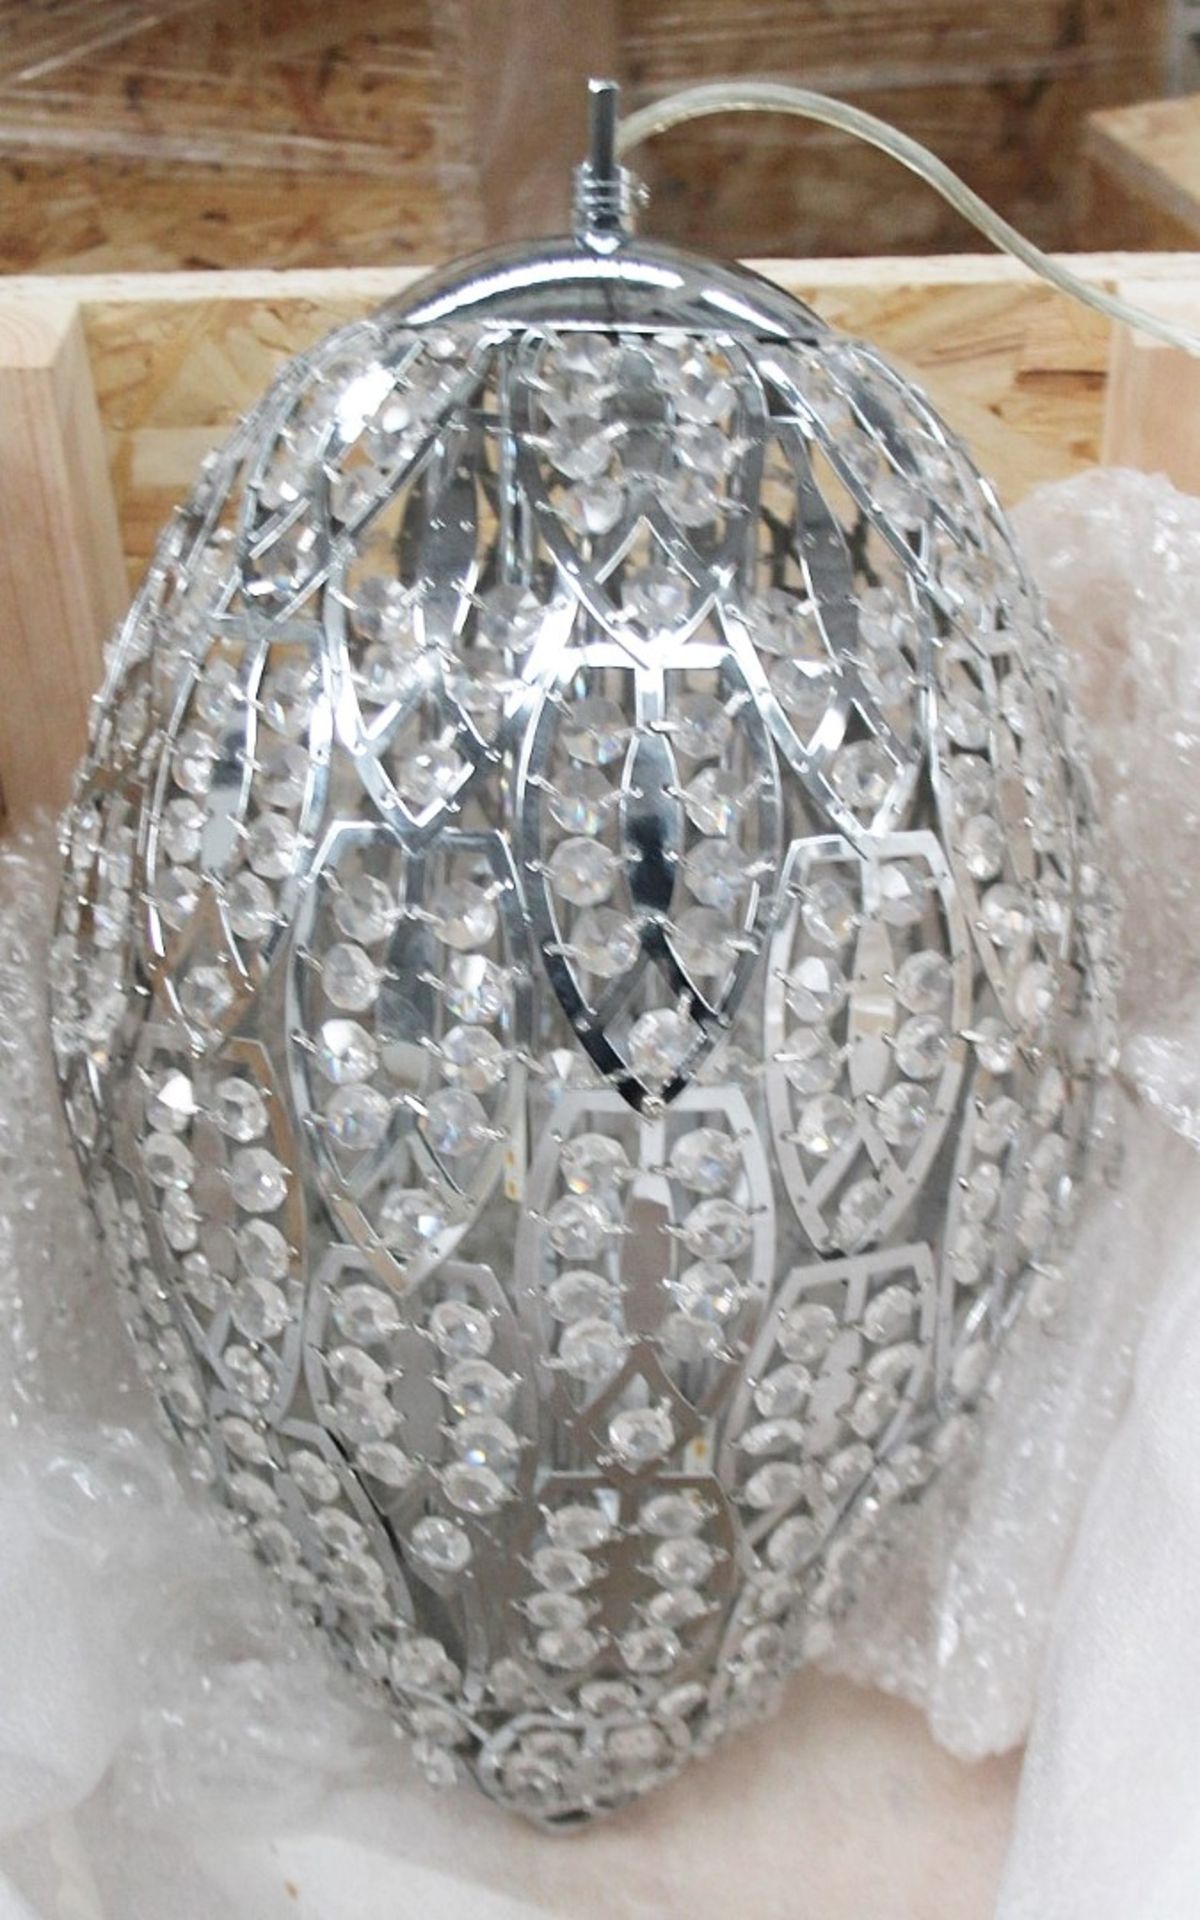 1 x High-end Italian LED Egg-Shaped Light Fitting Encrusted In Premium ASFOUR Crystal - RRP £4,000 - Image 7 of 9